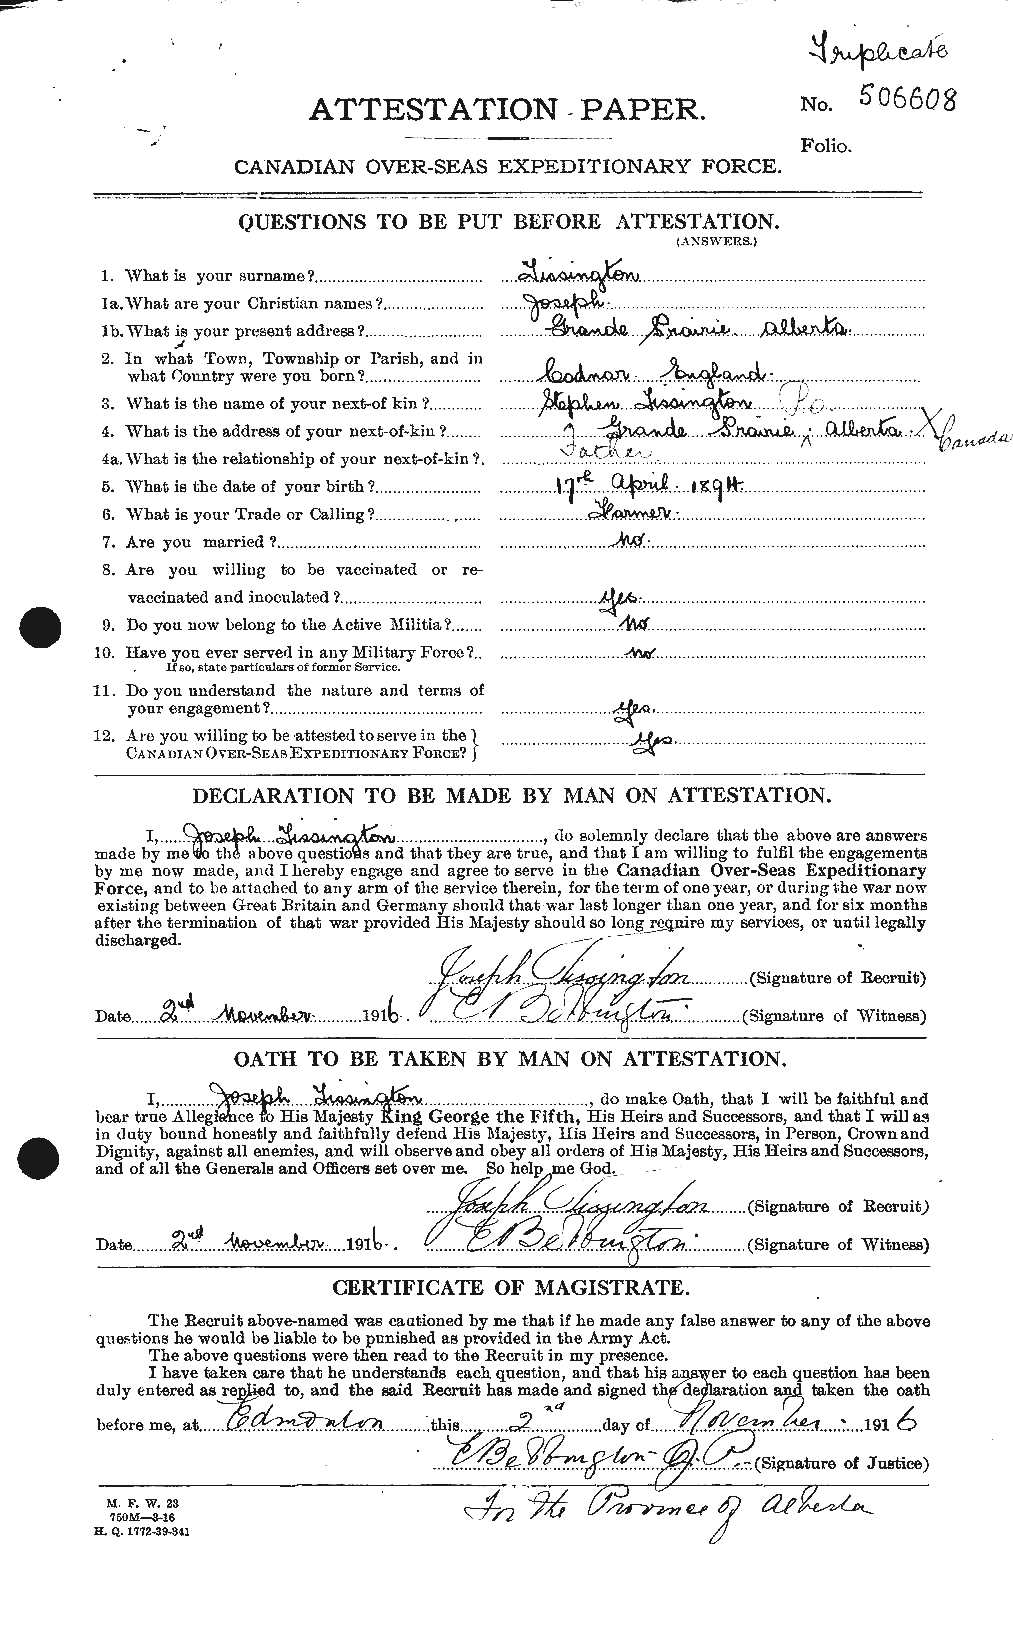 Personnel Records of the First World War - CEF 634865a